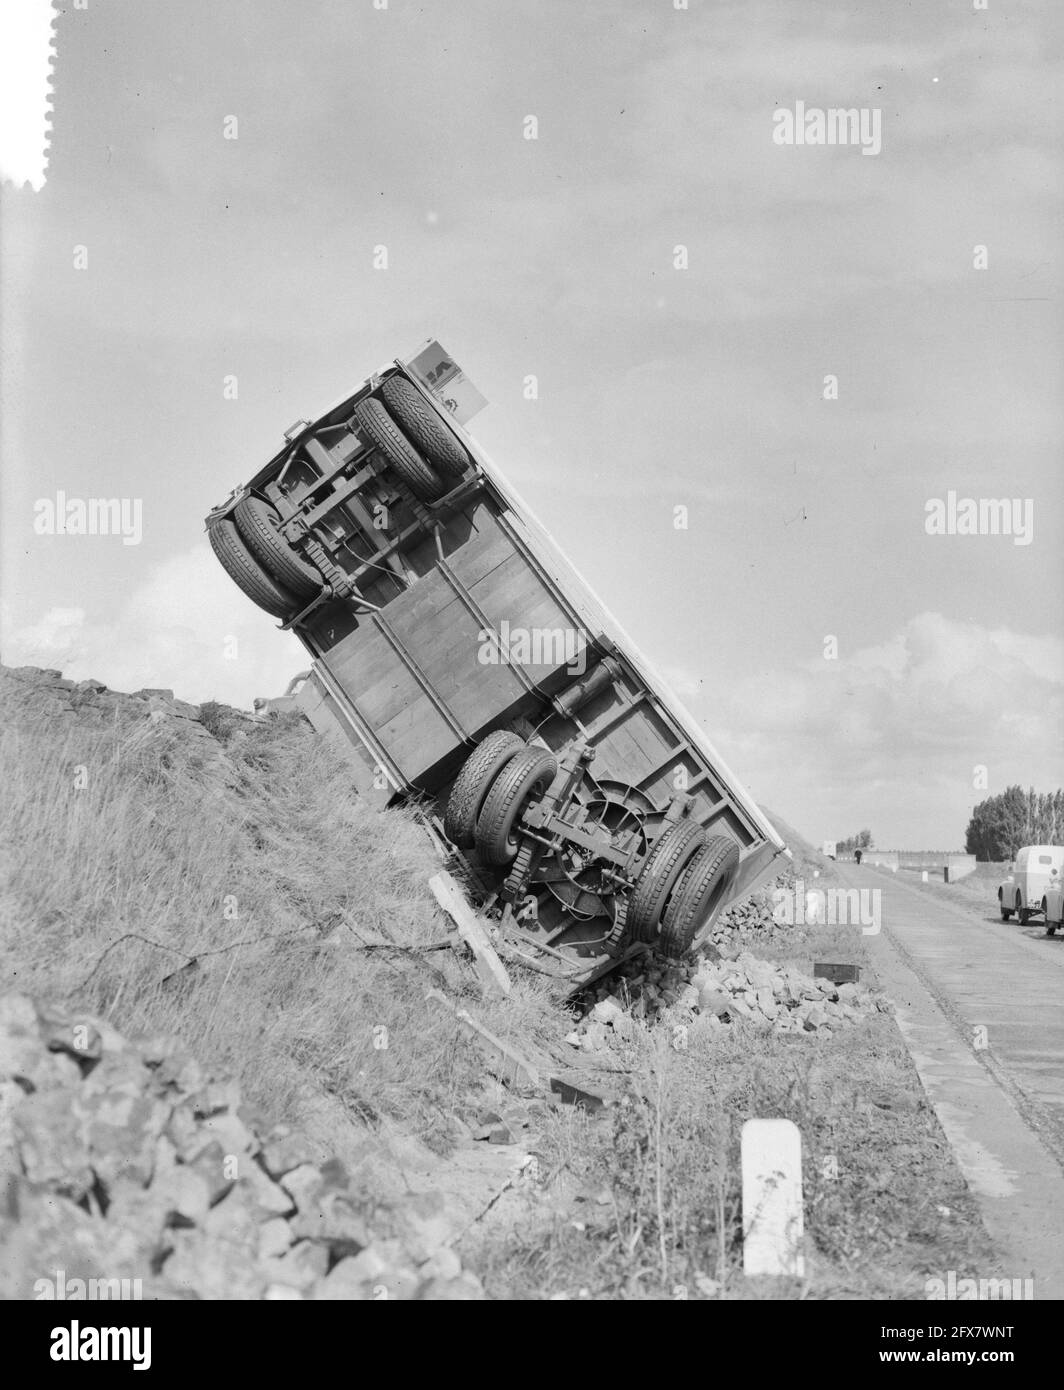 Trailer on State Highway in front of levee, September 10, 1953, trailers, levees, The Netherlands, 20th century press agency photo, news to remember, documentary, historic photography 1945-1990, visual stories, human history of the Twentieth Century, capturing moments in time Stock Photo